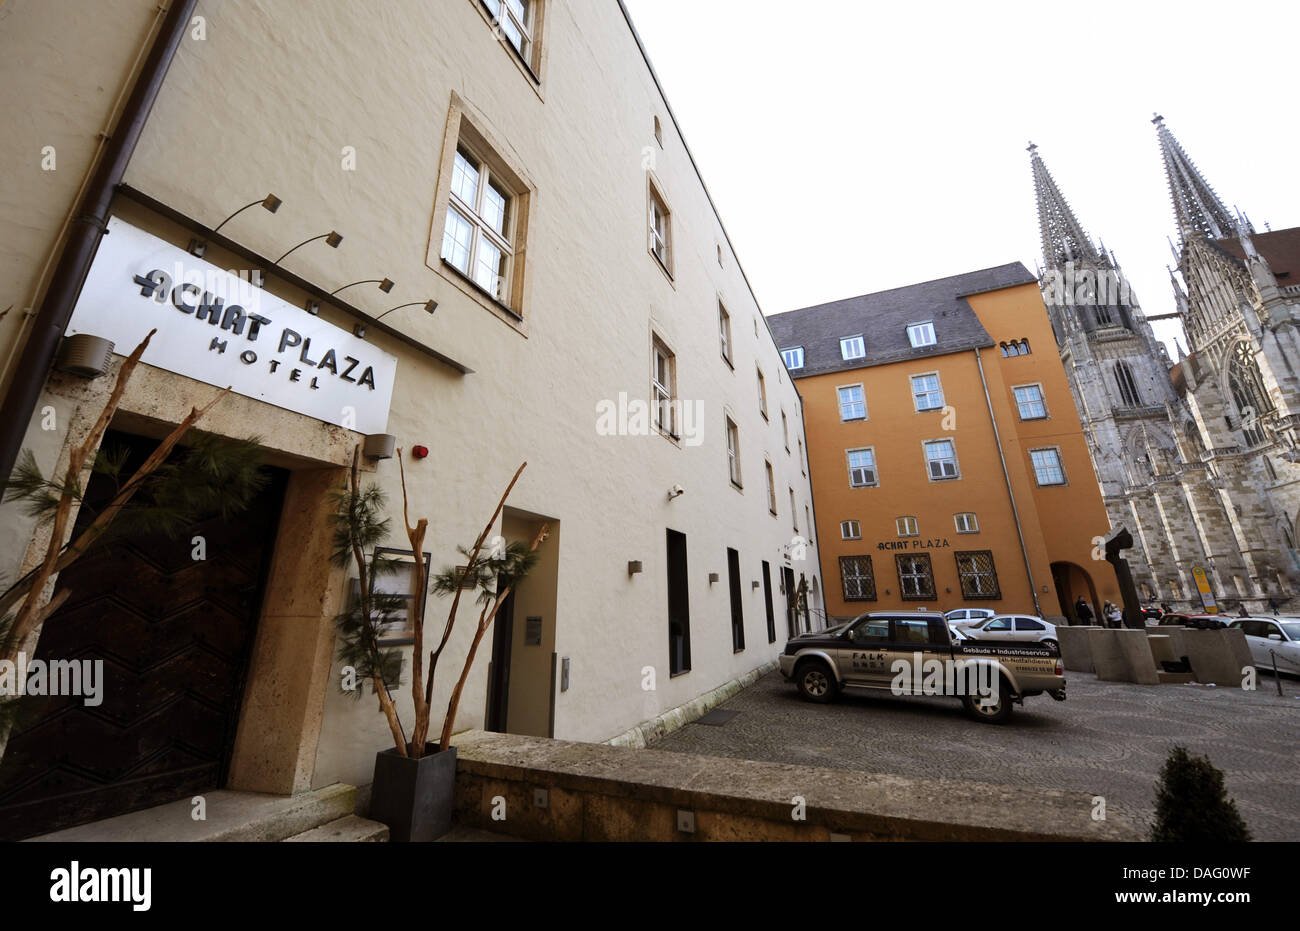 The hotel residence of Pete Doherty is pictured in Regensburg, Germany, 9 March 2011. Unknown burglars broke into a music shop and stole a guitar in Regensburg. Currently, British rock musician Peter Doherty also shoots his first film in Regensburg. The police are now verifying whether Doherty has been involved in the crime. A trio of men has been seen stealing a guitar. However, n Stock Photo